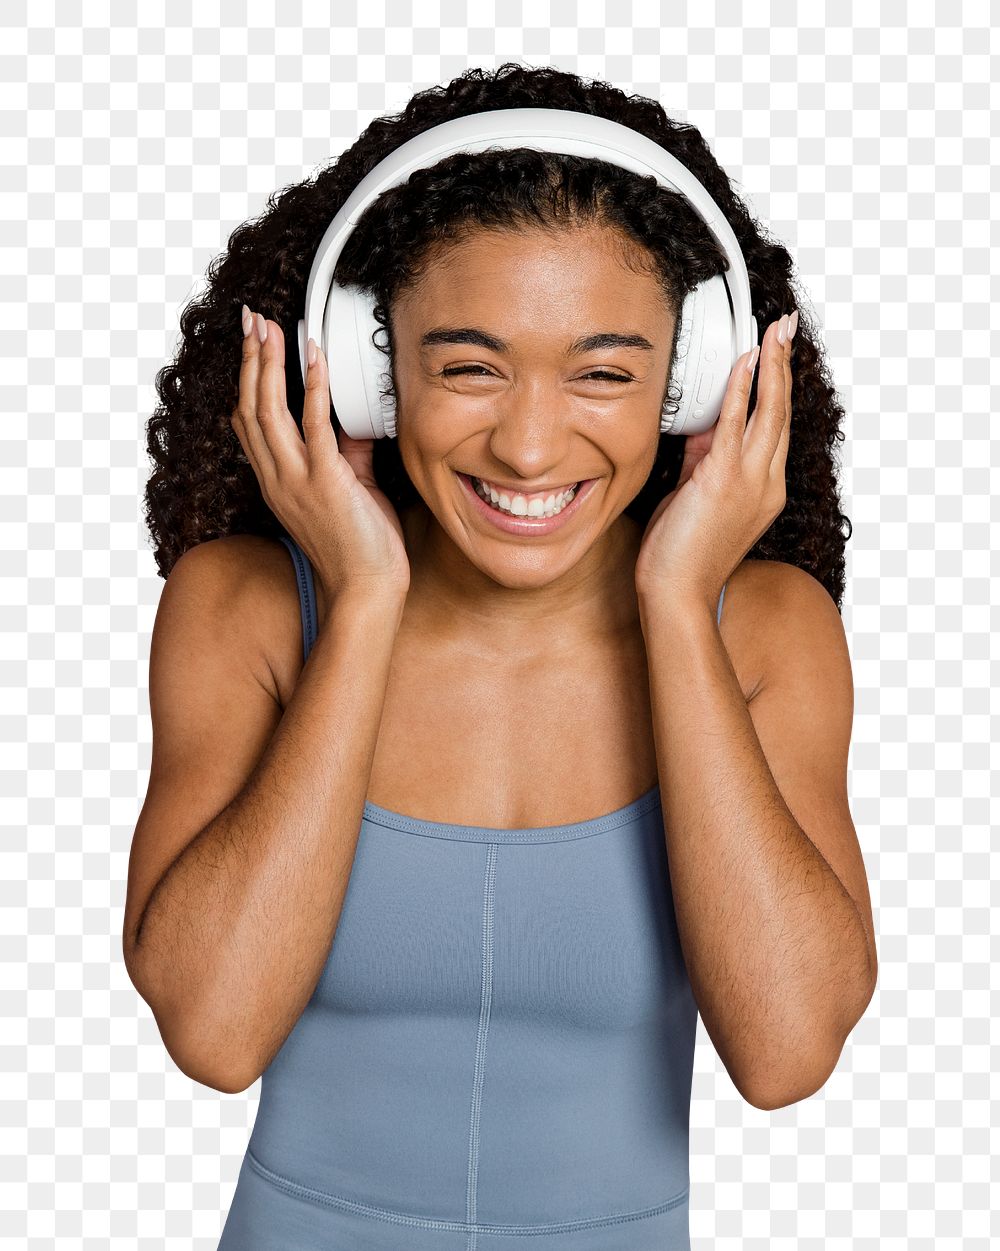 Png woman with headphones sticker, transparent background